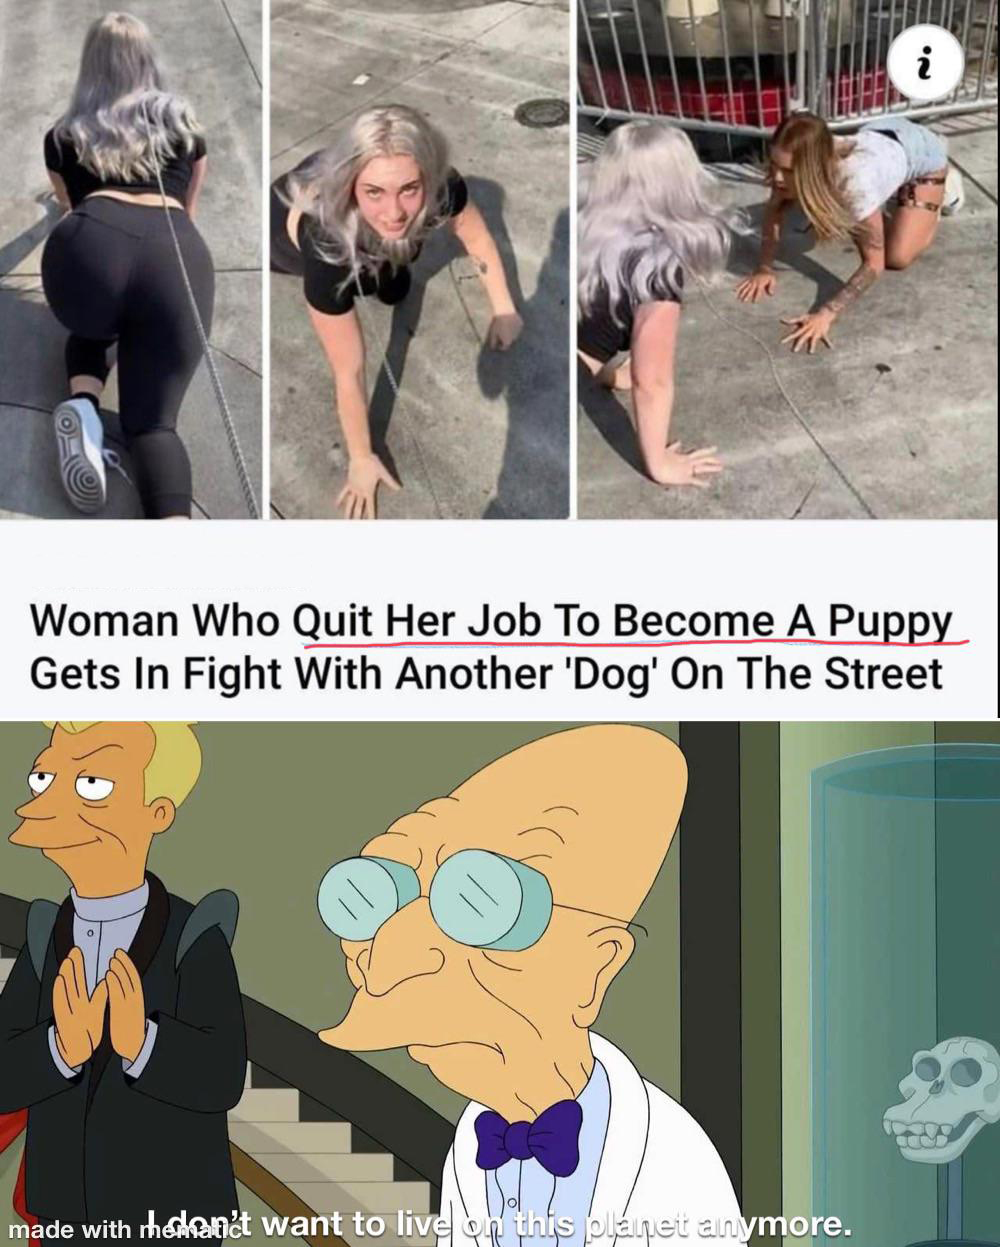 live on this planet anymore - i Woman Who Quit Her Job To Become A Puppy Gets In Fight With Another 'Dog' On The Street made with rhedsandt want to live on this planet anymore.